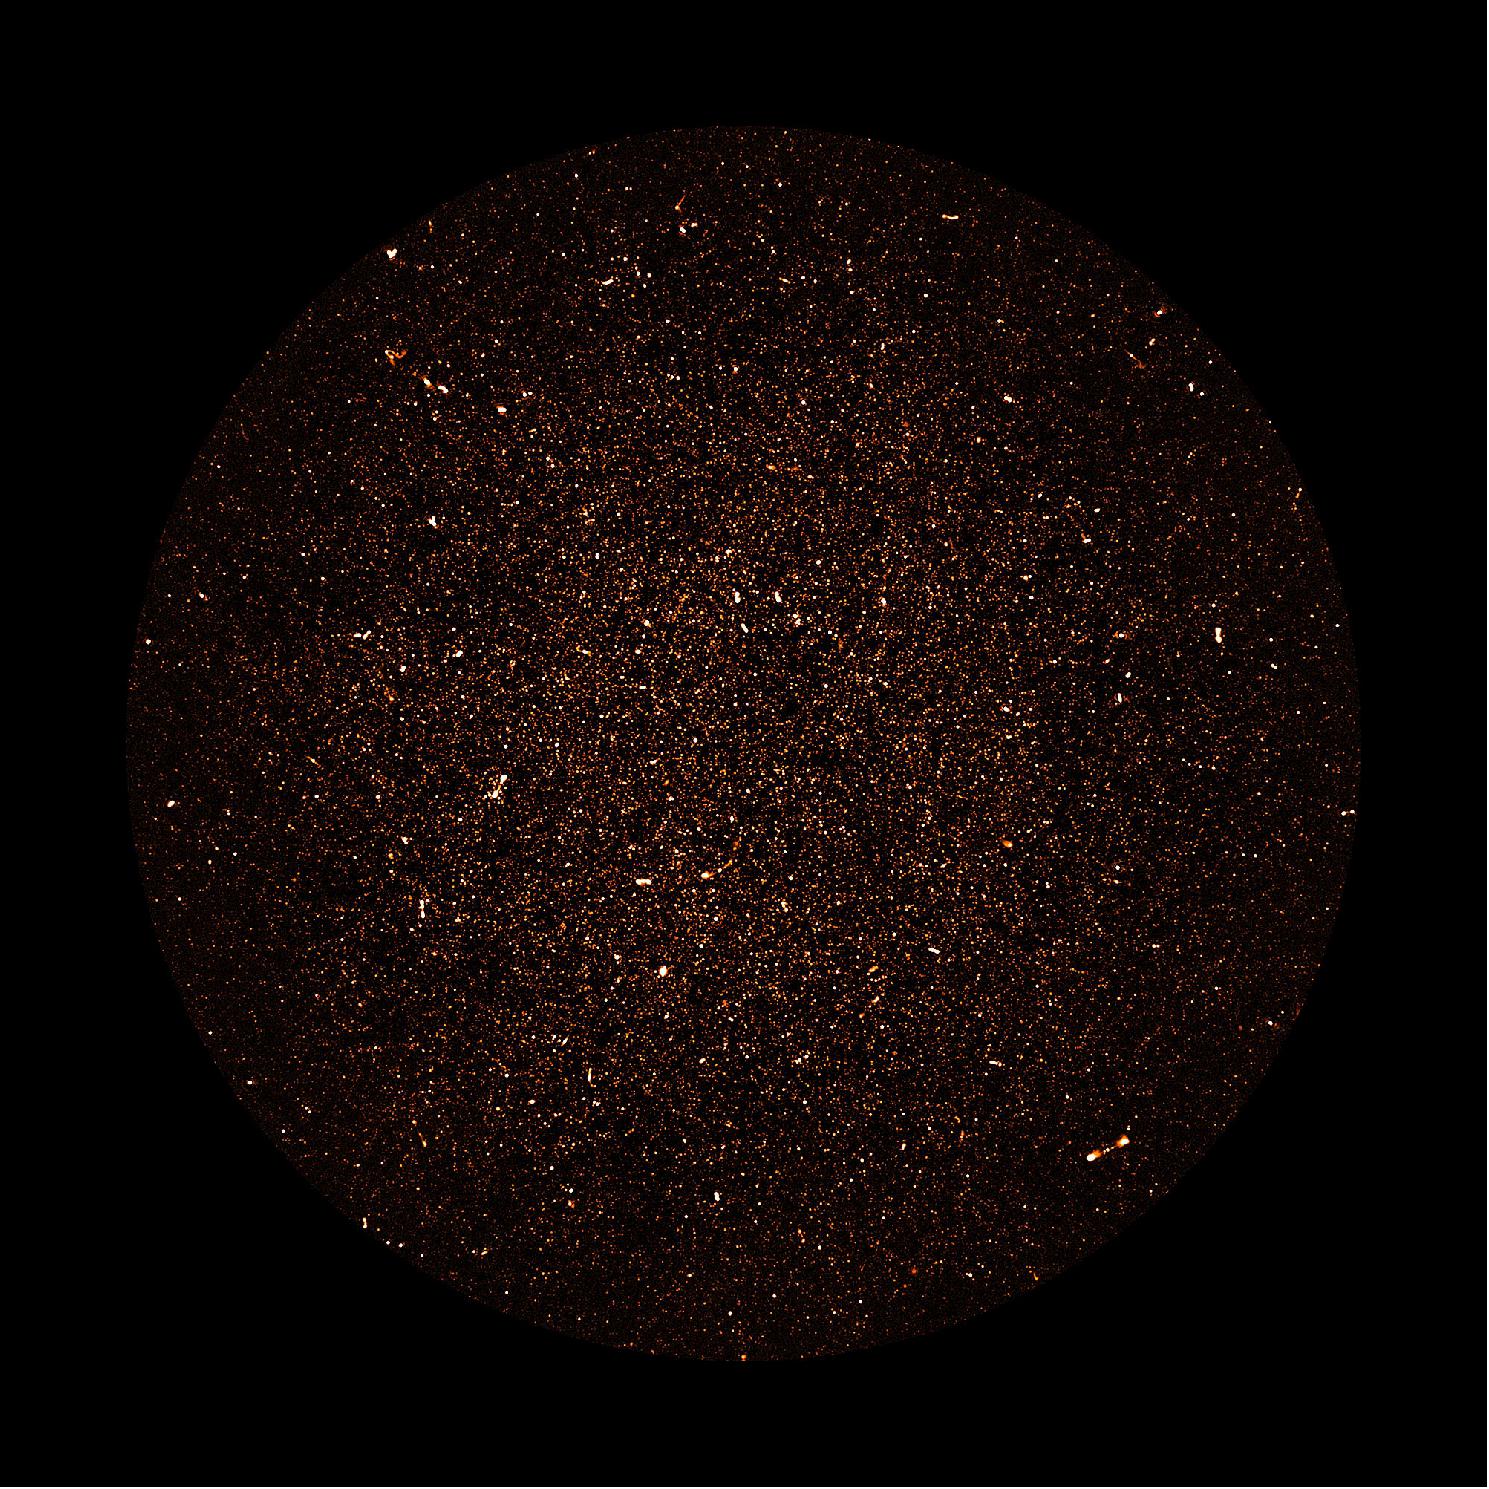 Figure 75: MeerKAT image of radio galaxies: Thousands of galaxies are visible in this radio image covering a square degree of sky near the south celestial pole, made by the MeerKAT radio telescope array in South Africa. The brightest spots are luminous radio galaxies powered by supermassive black holes. The myriad faint dots are distant galaxies like our own Milky Way, too faint to have been detected before now, which reveal the star-formation history of the universe. Most galaxies are visible in the central part of the image, where the telescope is most sensitive (image credit: SARAO; NRAO/AUI/NSF)